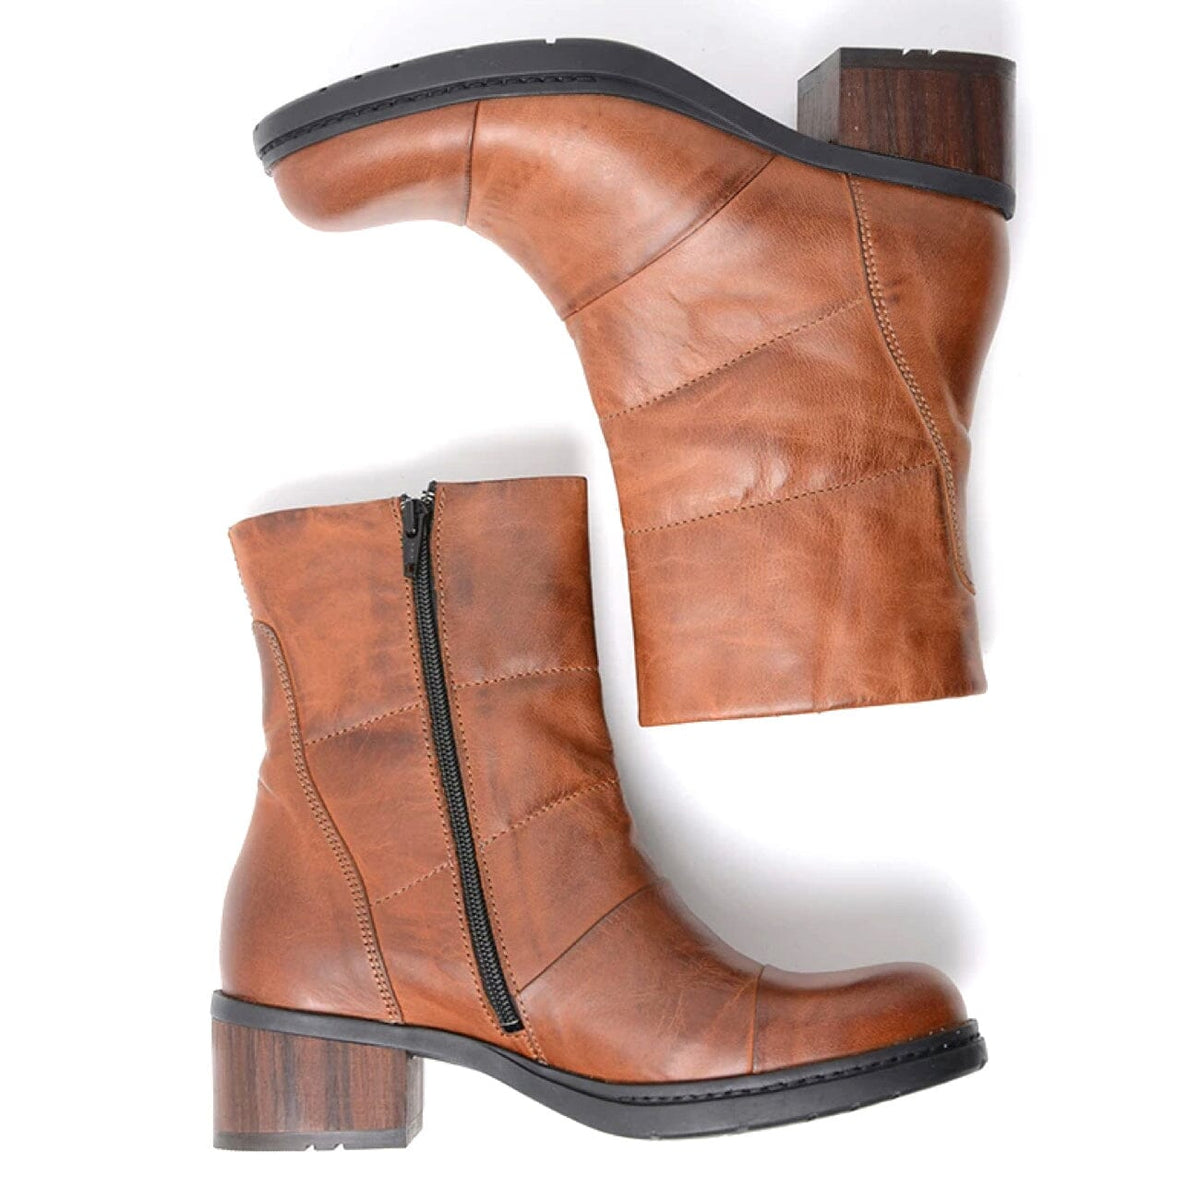 Wolky, Hinton, Boots, Leather, Cognac Boots Wolky 